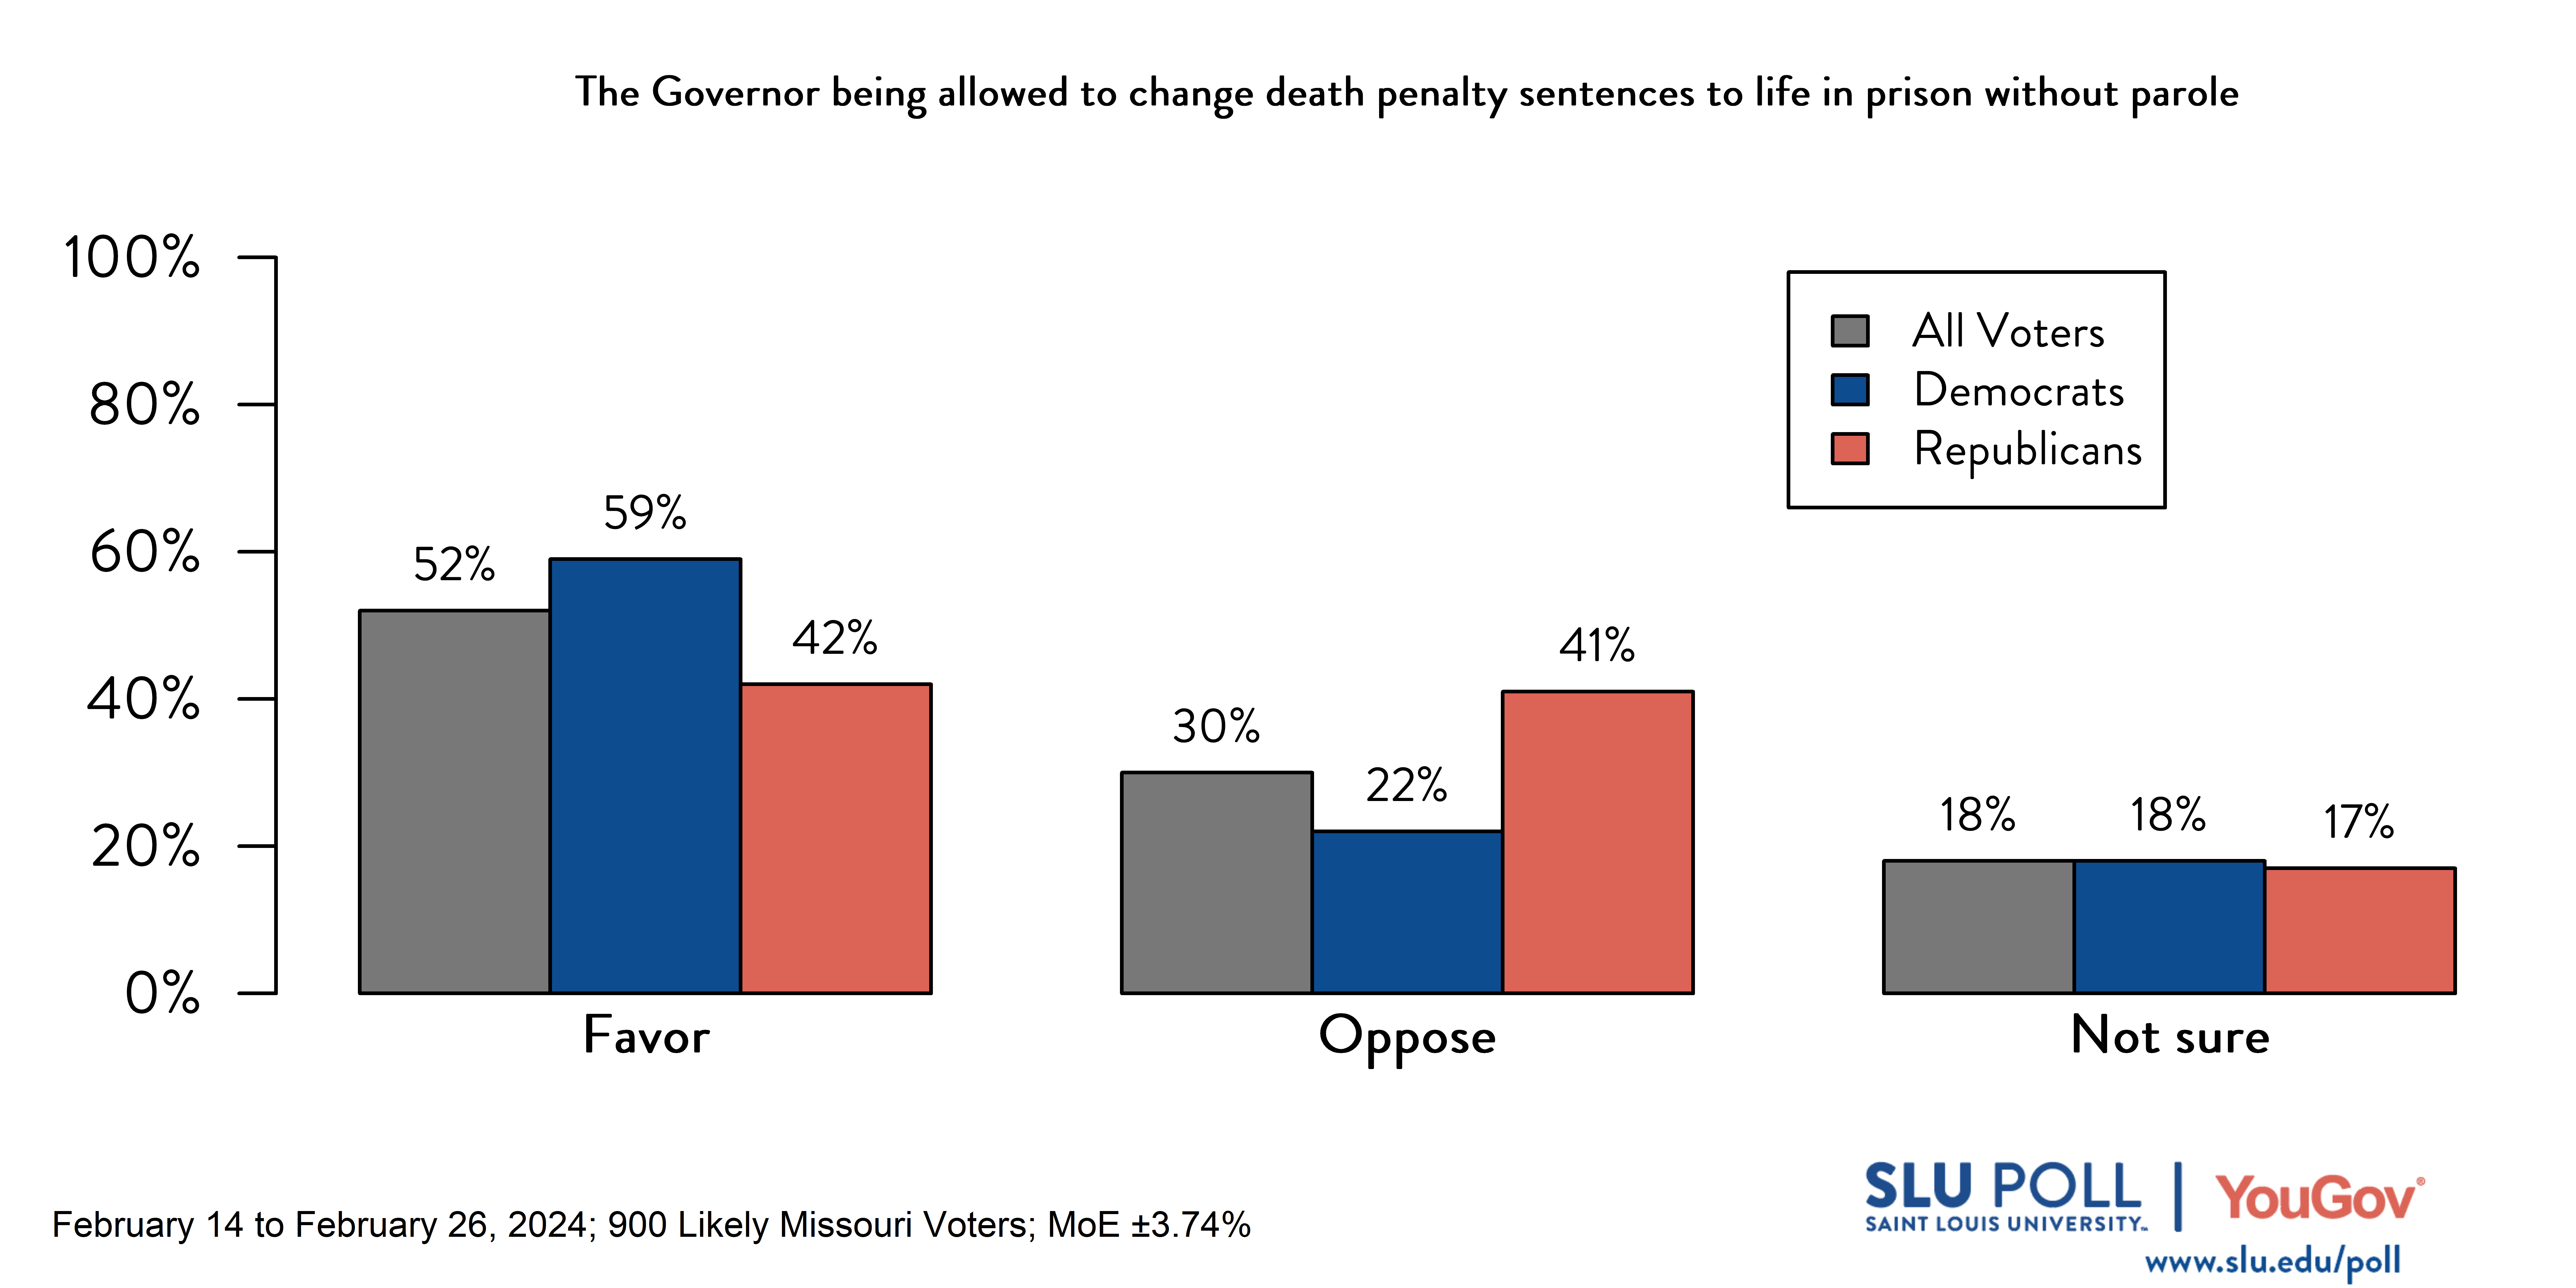 Likely voters' responses to 'Do you favor or oppose the following in the state of Missouri…The Governor being allowed to change death penalty sentences to life in prison without parole?': 52% Favor, 30% Oppose, and 18% Not Sure. Democratic voters' responses: ' 59% Favor, 22% Oppose, and 18% Not Sure. Republican voters' responses:  42% Favor, 41% Oppose, and 17% Not Sure.